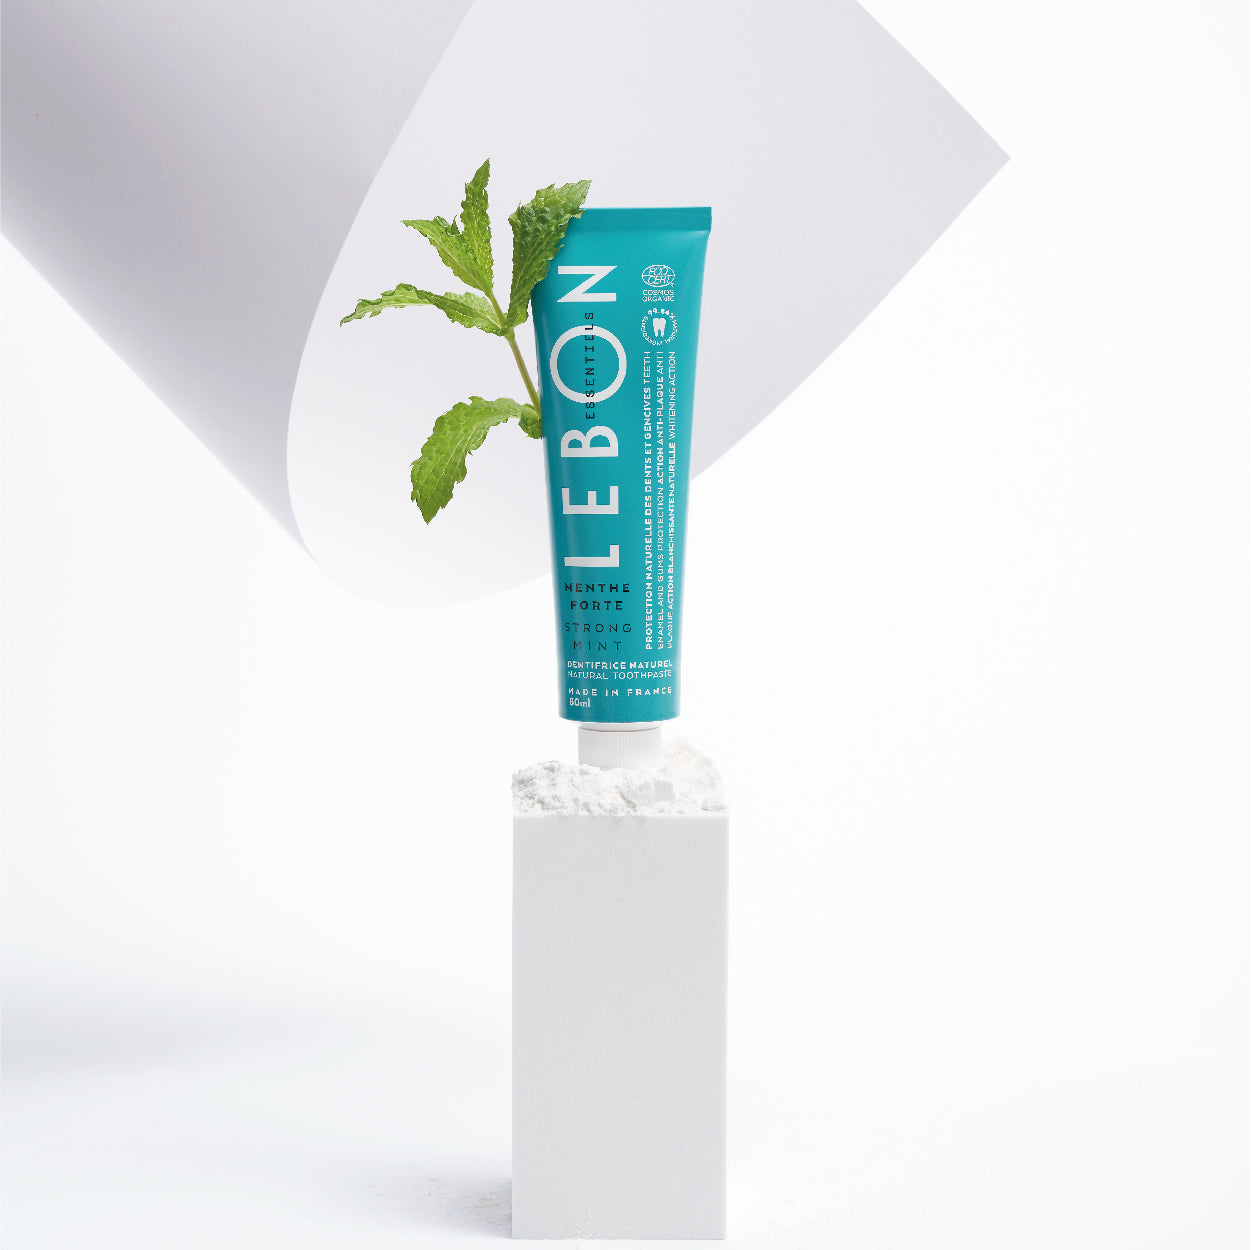 LEBON Strong Mint Toothpaste